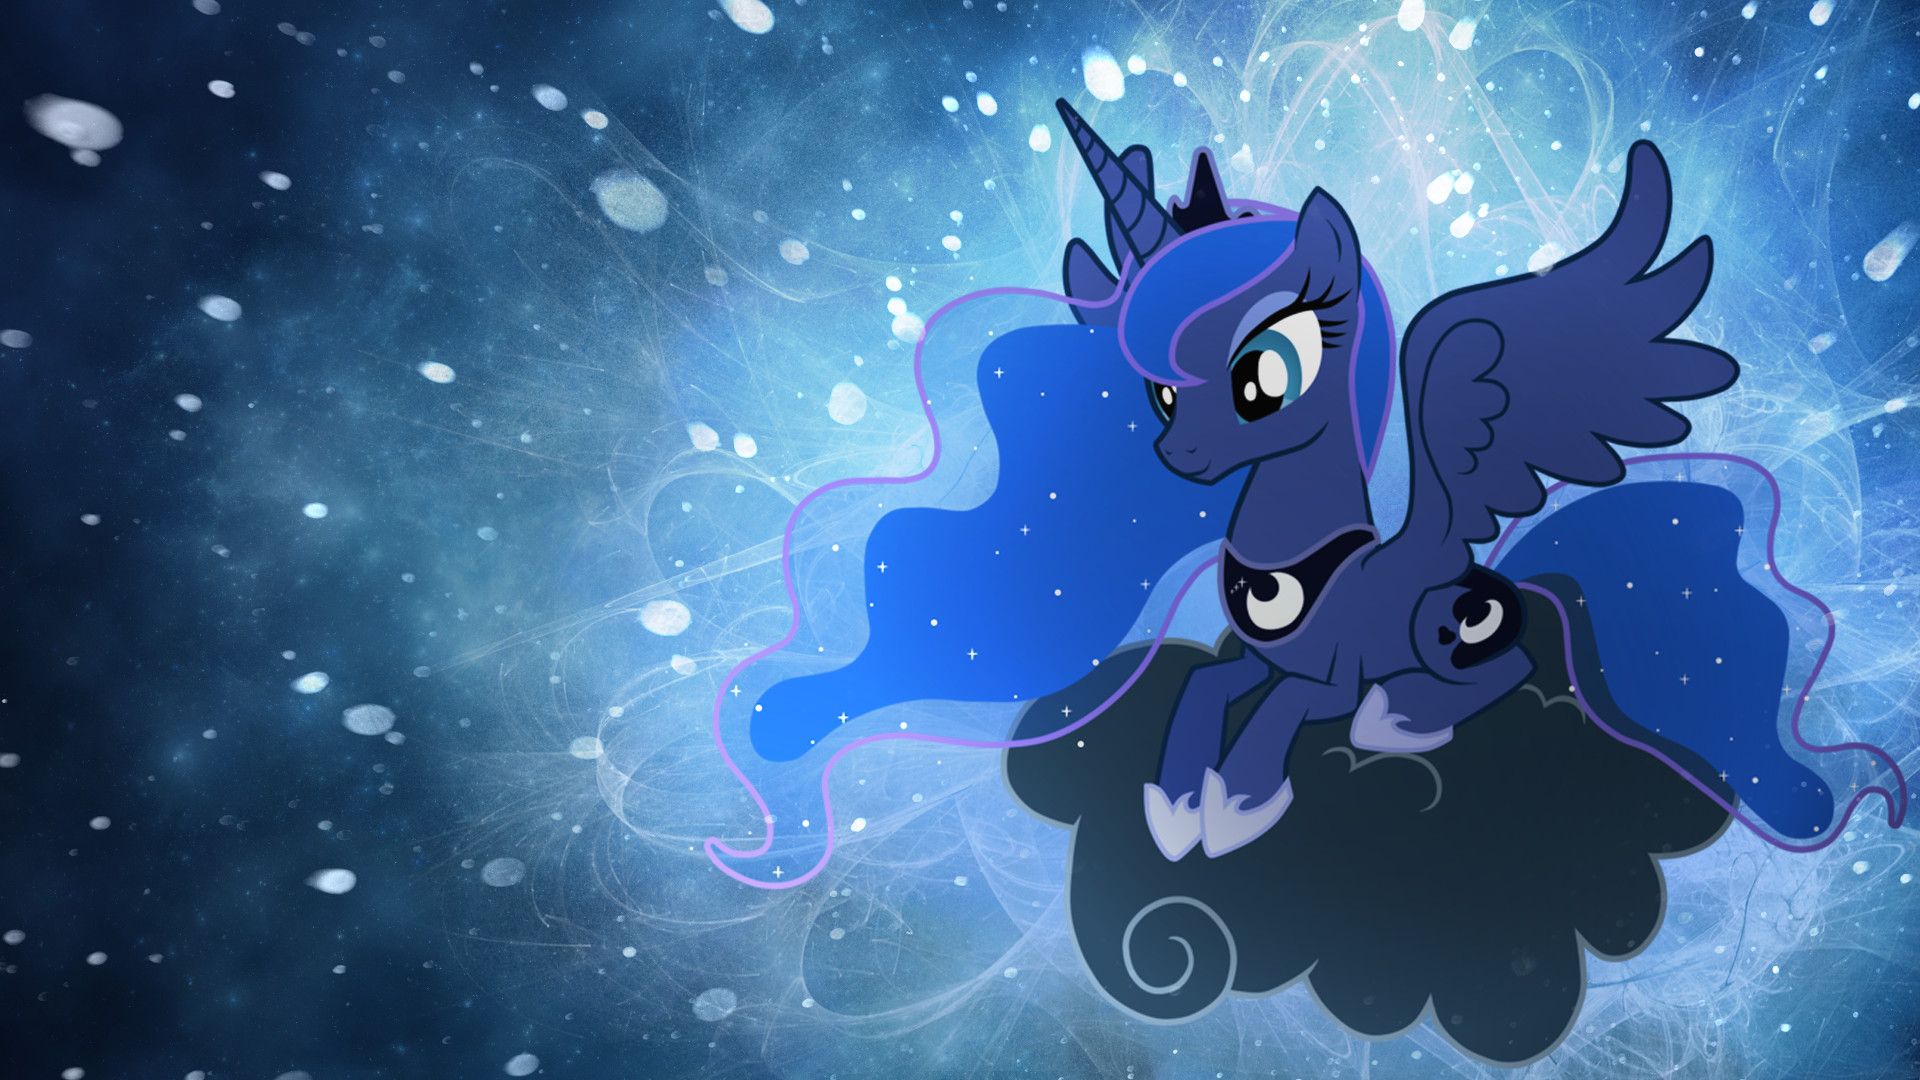 1920x1080 Crystal-Heart images Princess Luna wallpaper HD wallpaper and background  photos